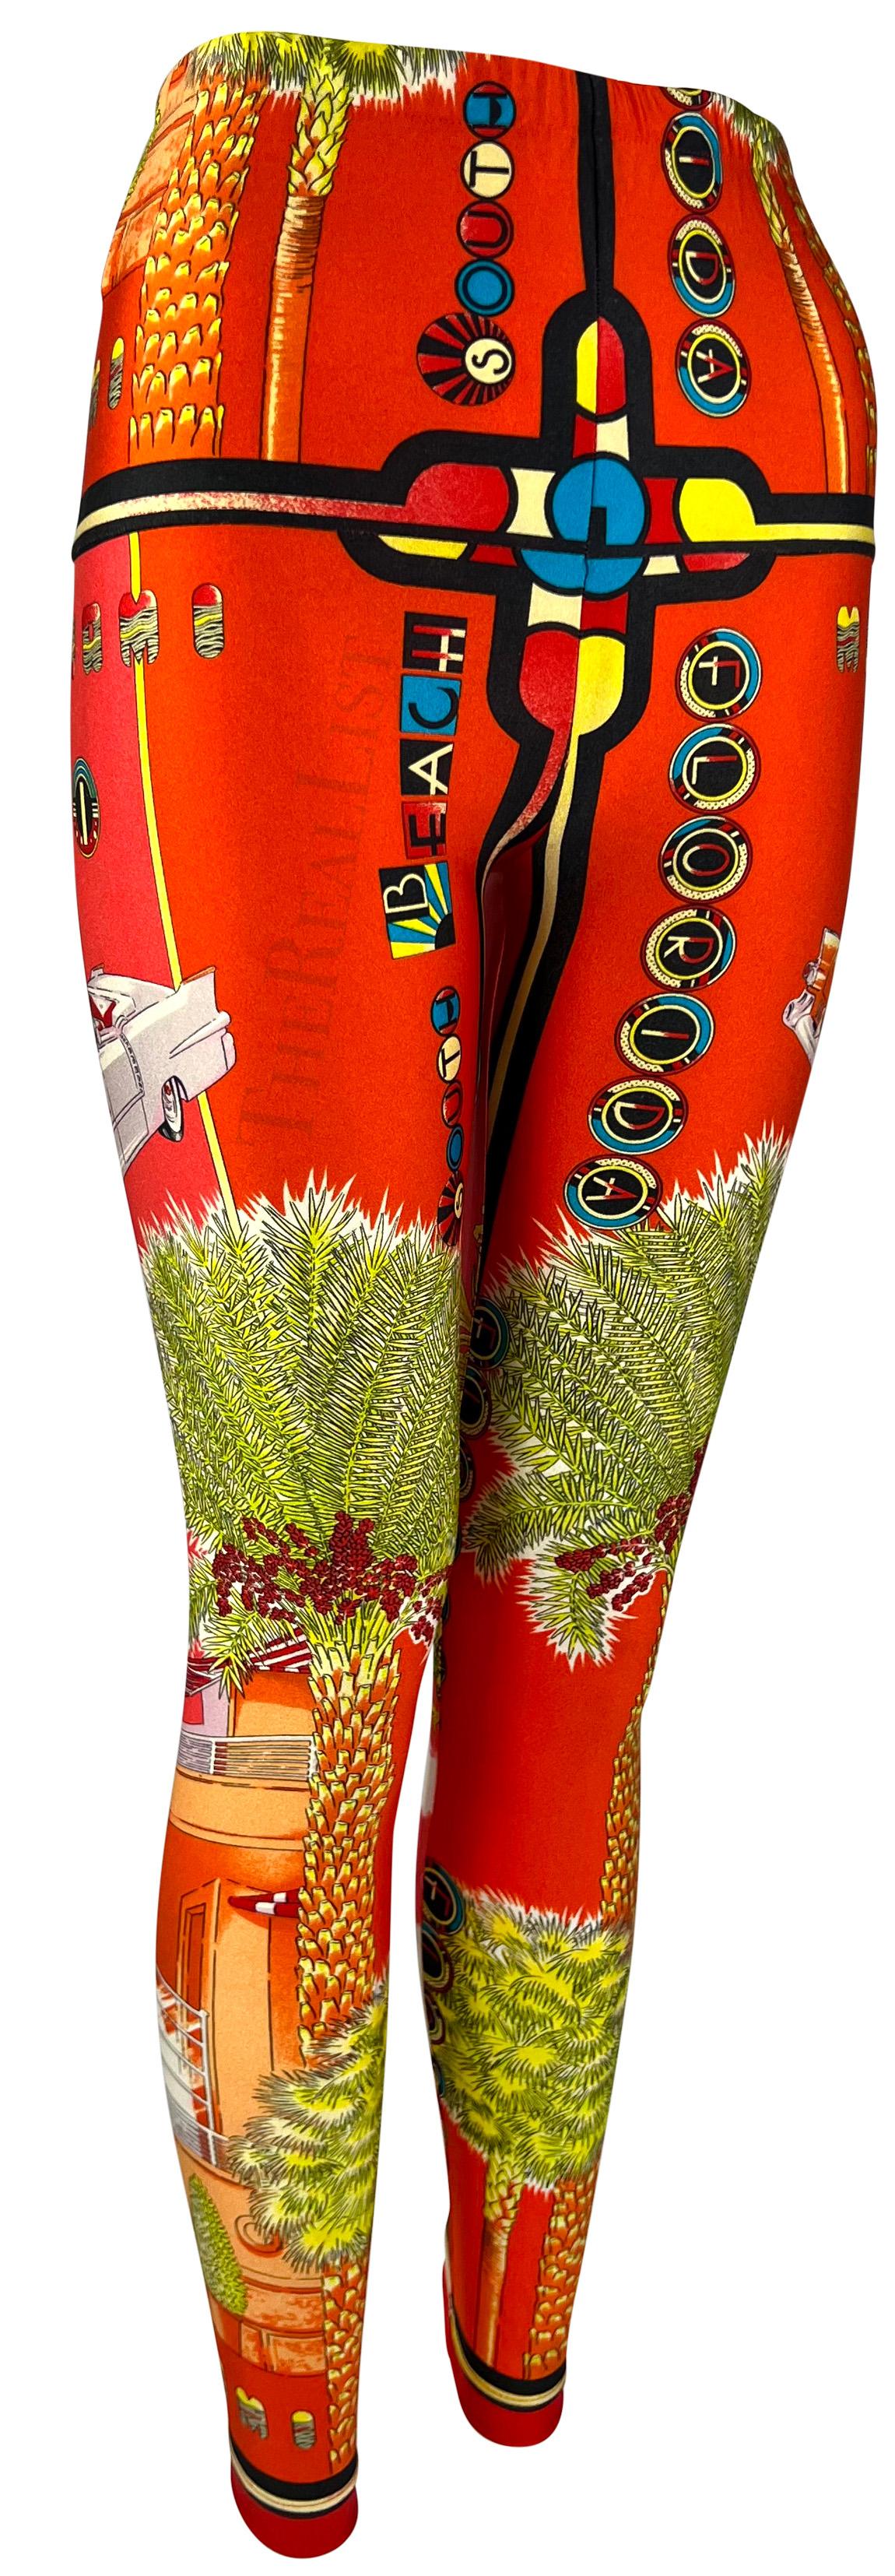 S/S 1993 Gianni Versace South Beach Miami Sunset Orange Red Florida Print Tights For Sale 4